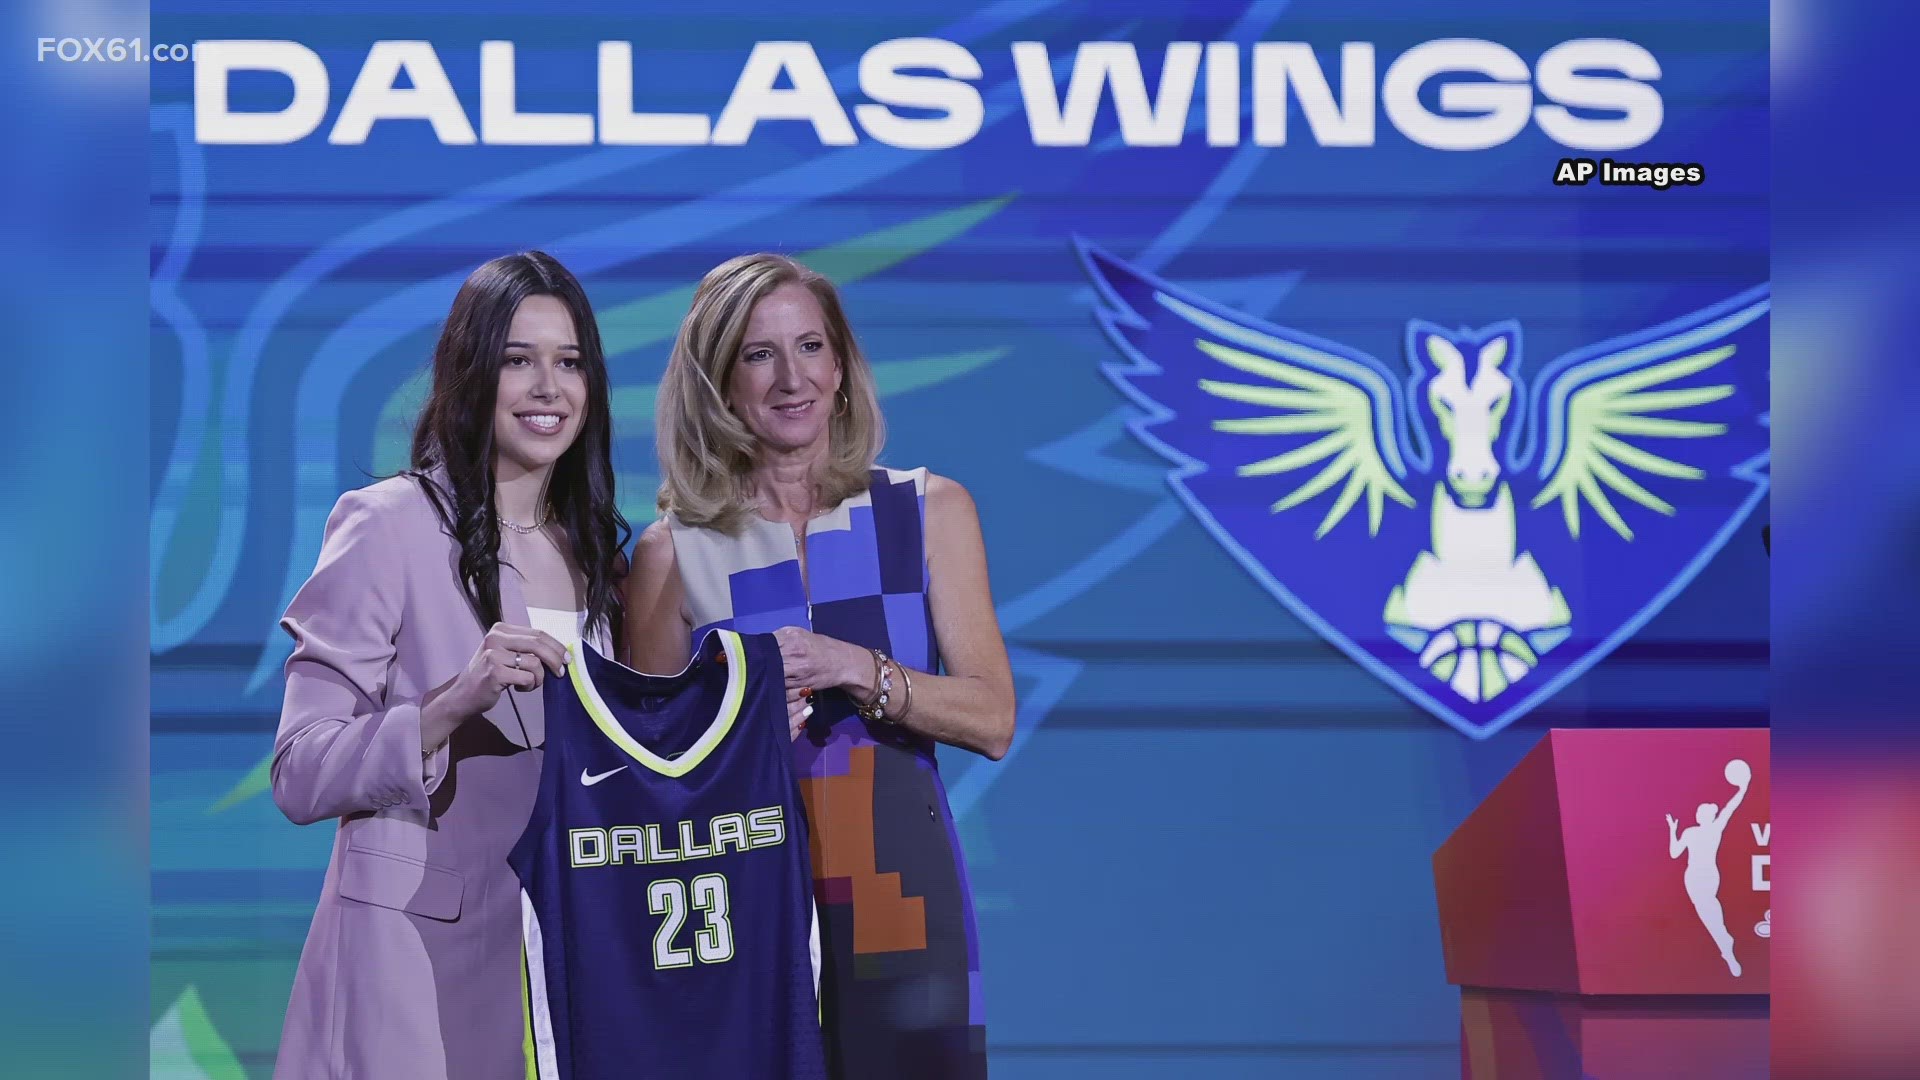 Lopez Senechal was selected 5th overall to the Dallas Wings, and Juhasz was selected 16th in the second round to the Minnesota Lynx.